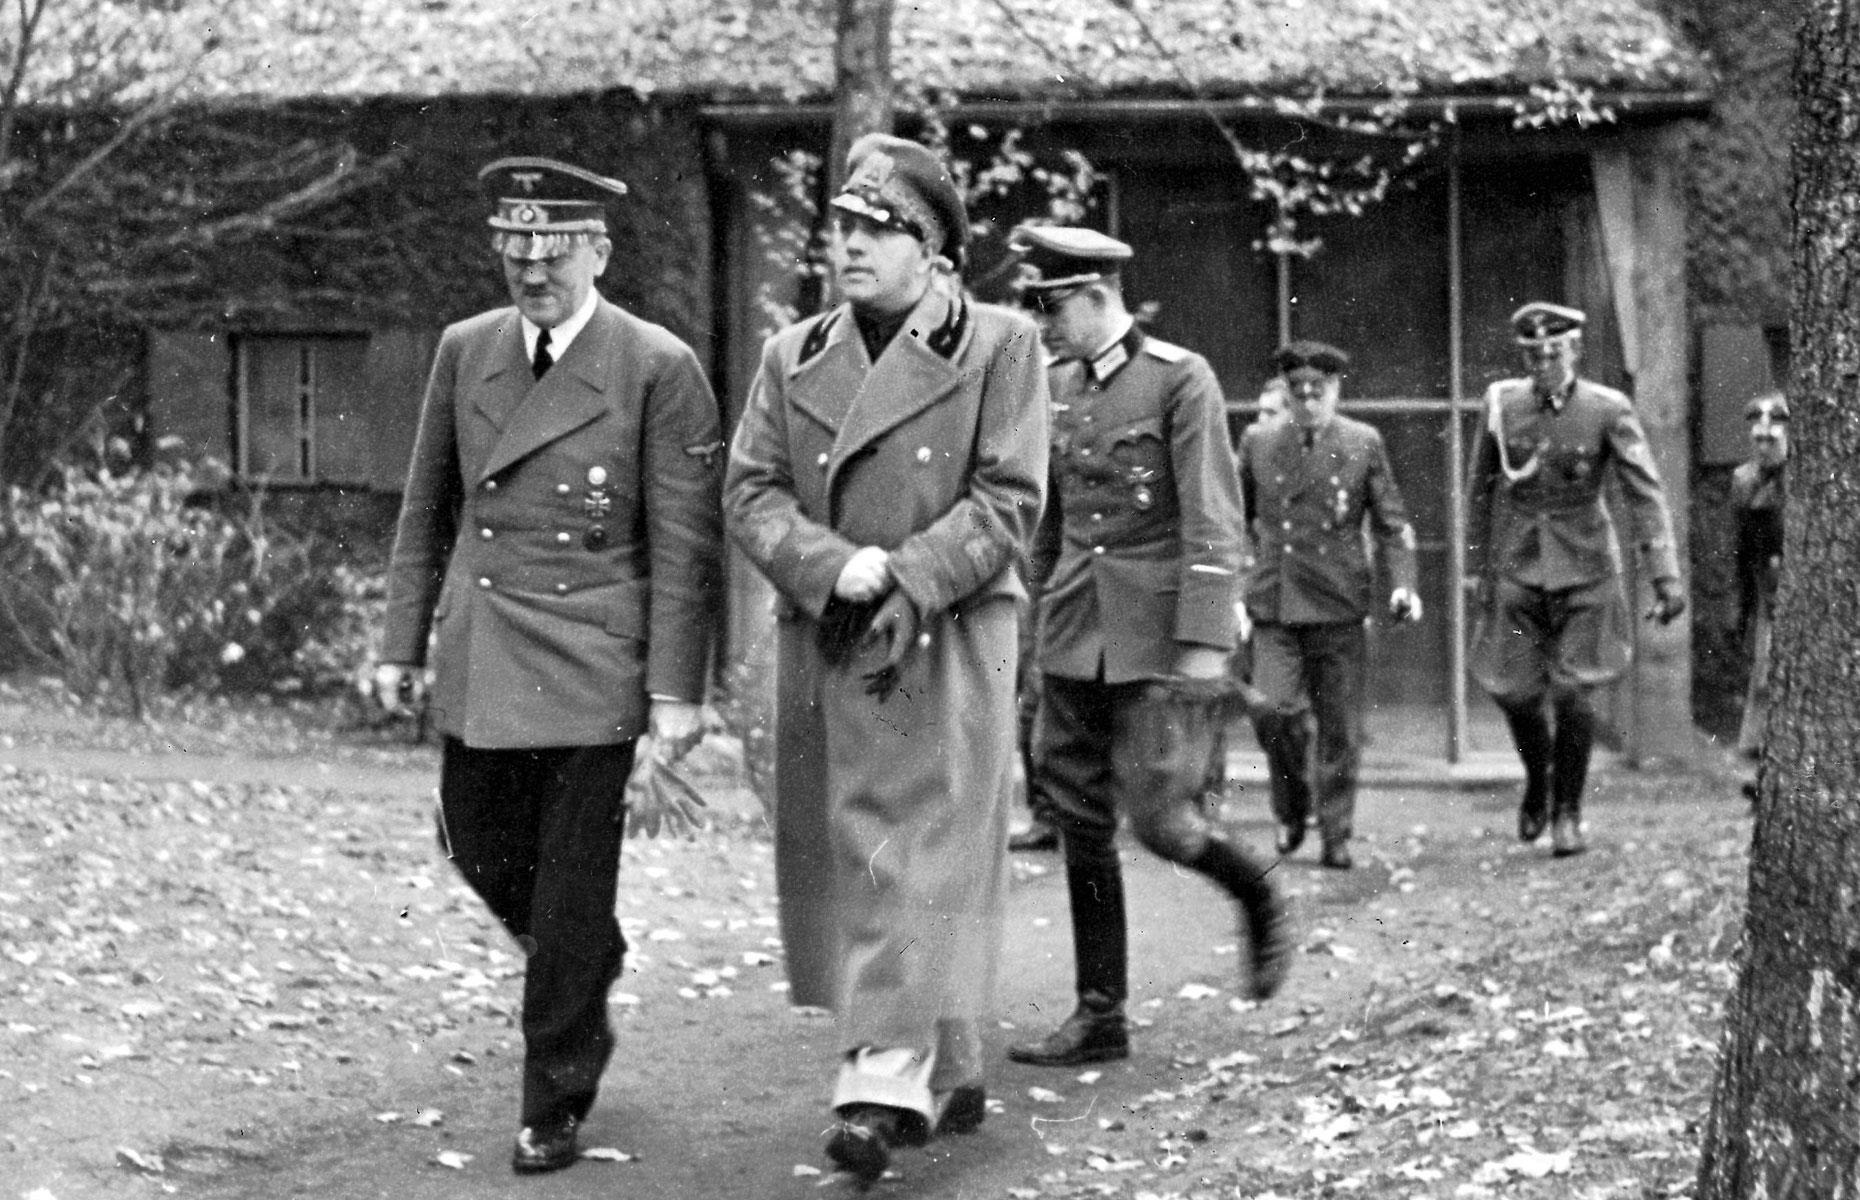 <p>Hitler spent much of the Second World War—more than 800 days in fact—at the Wolfsschanze<em>,</em> or Wolf's Lair, his Eastern Front HQ, where he lay low for much of the time in a heavily fortified bunker. Located deep in the Masurian woods in what was then East Prussia, the sinister complex was constructed under a veil of secrecy and completed in 1941, with the murderous despot arriving not long after.</p>